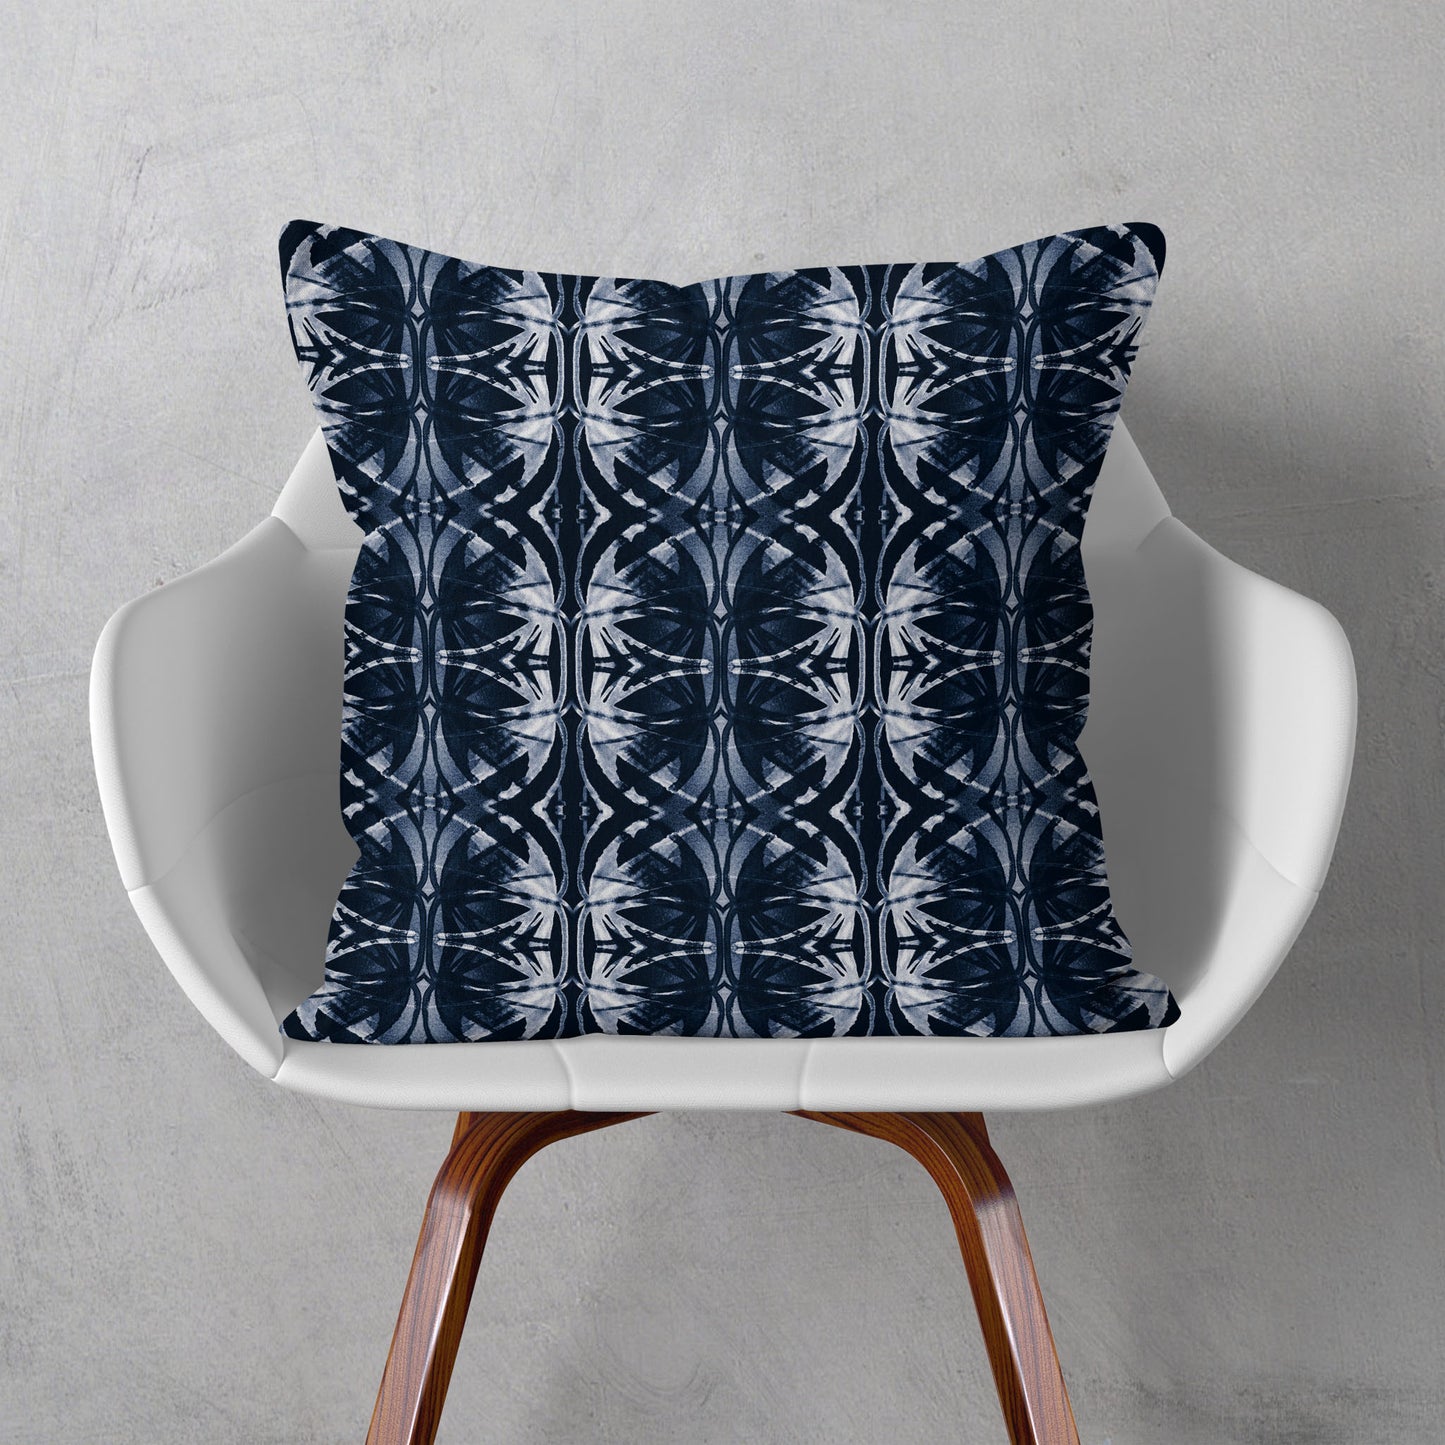 Square throw pillow featuring a dark blue and white abstract pattern, sitting on a  modern white chair